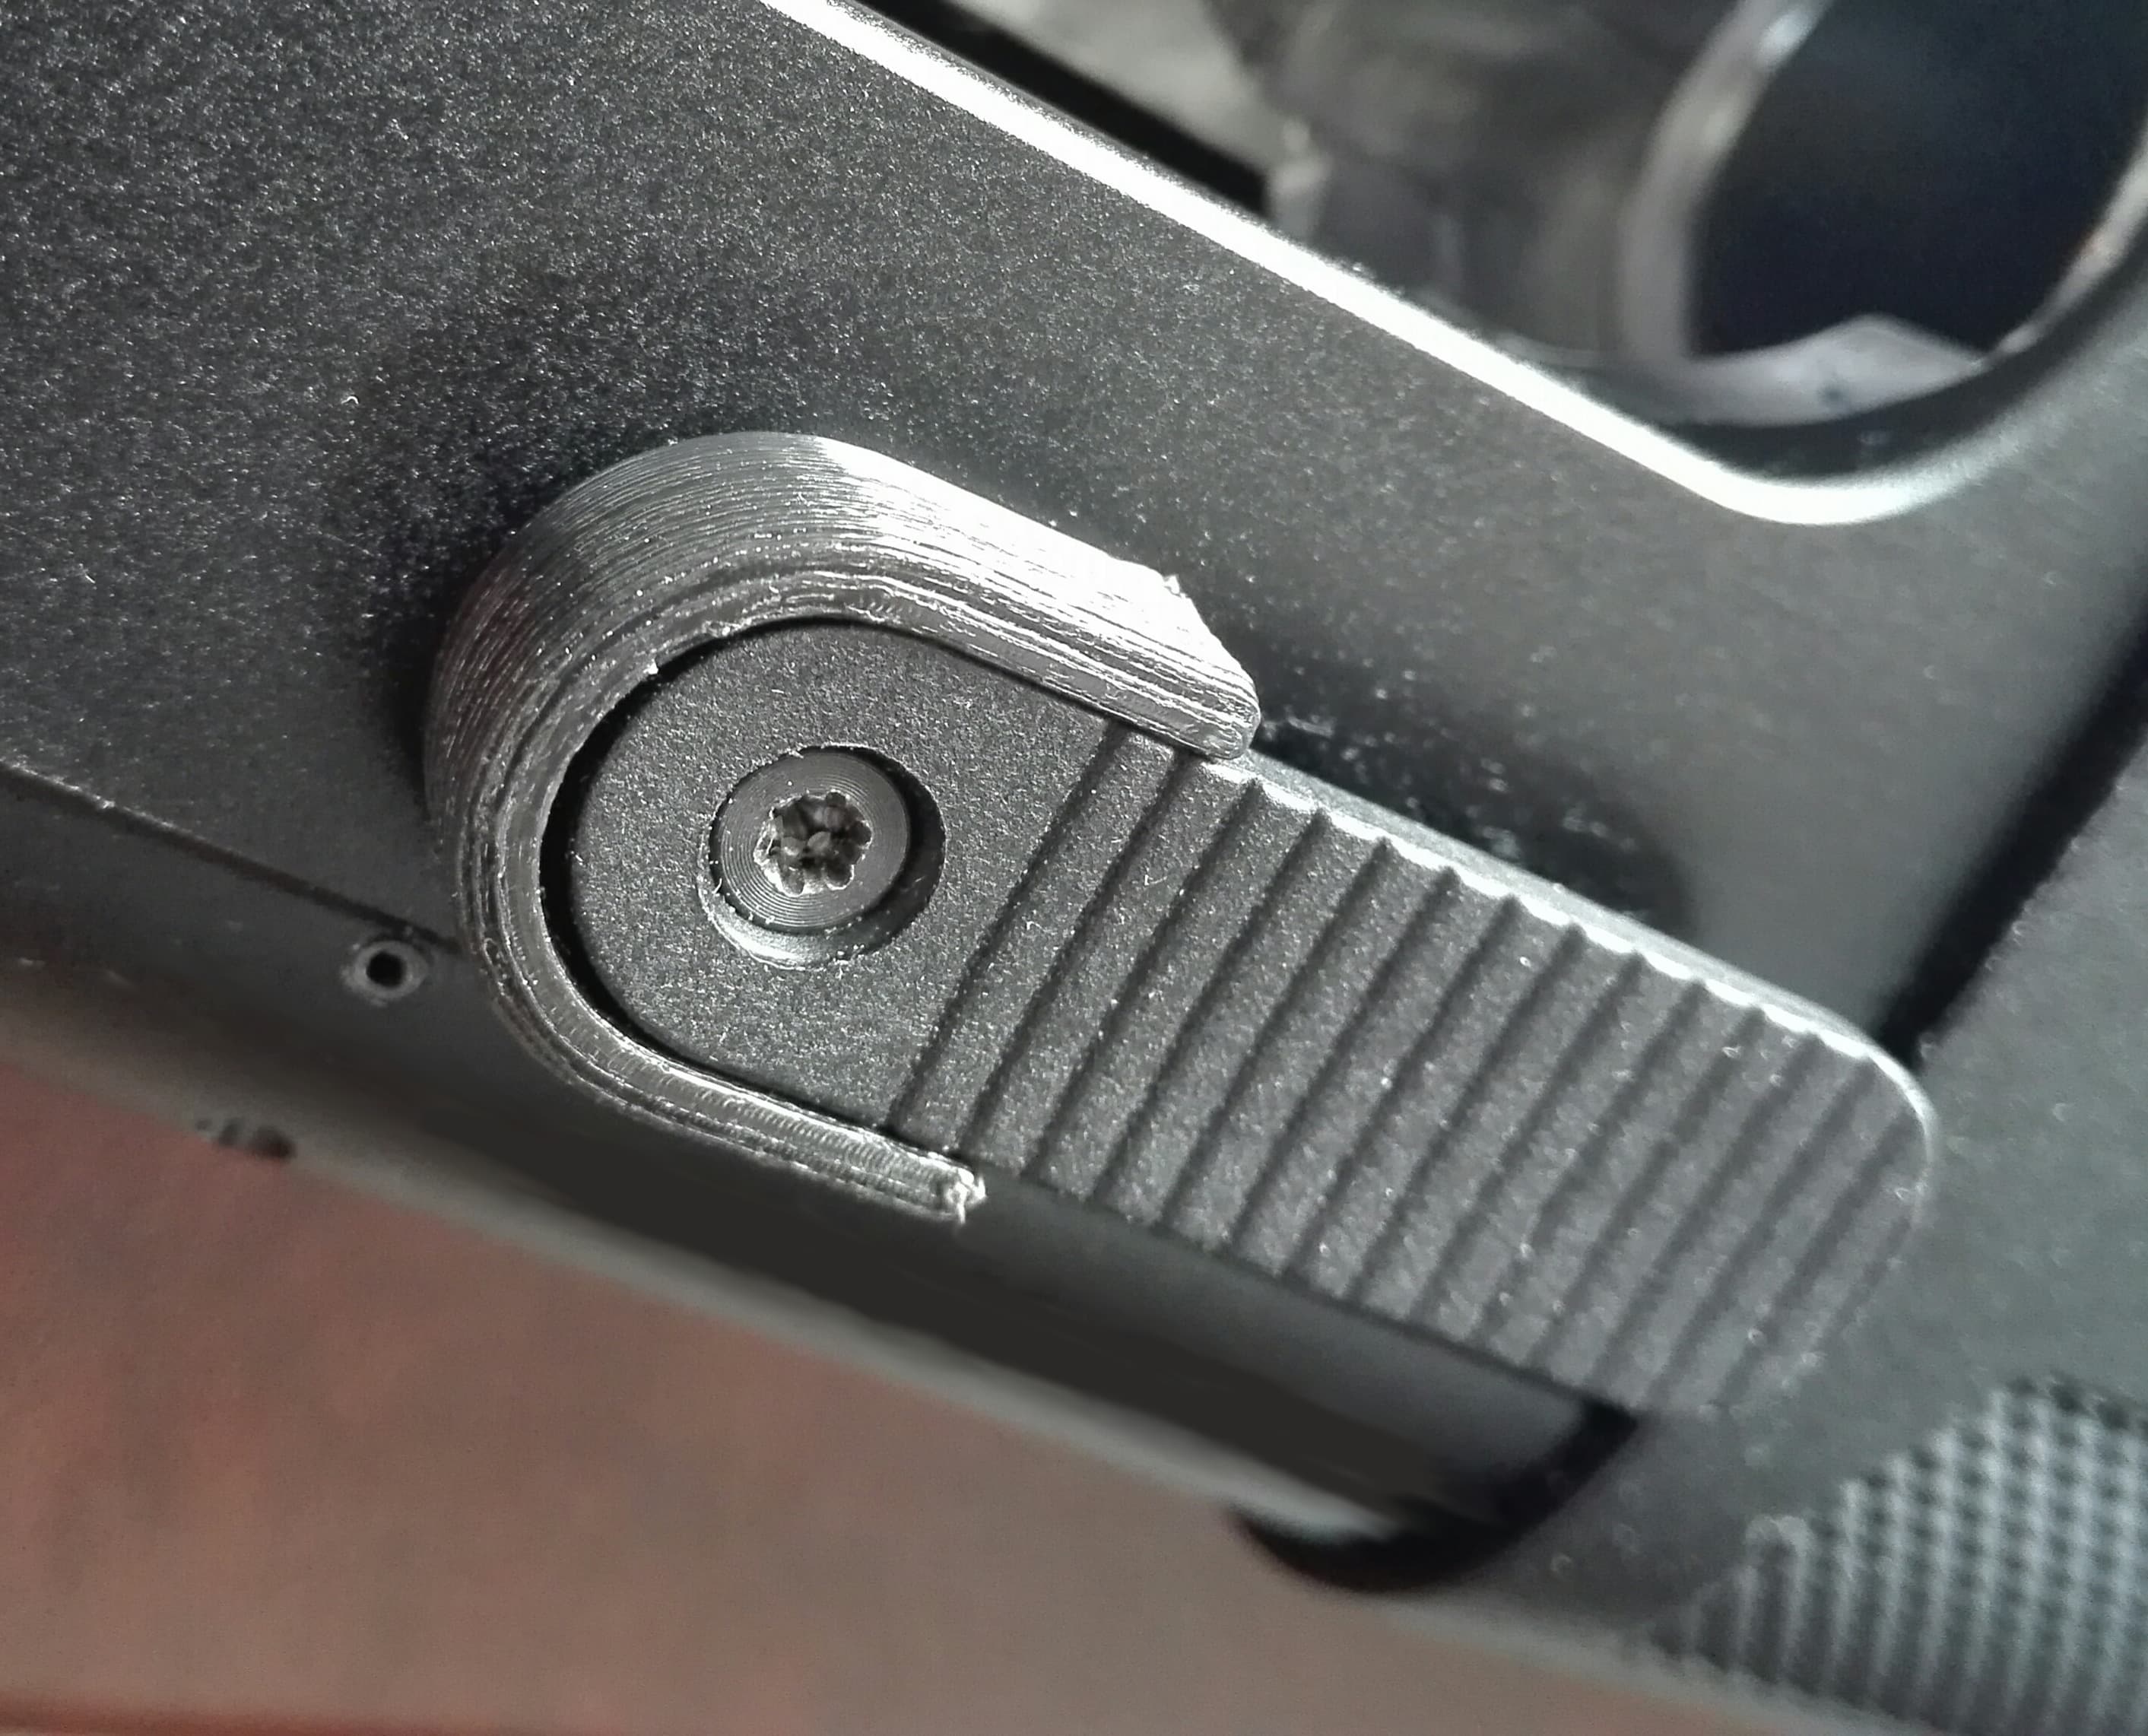 Bolt release shroud for first generation Beretta 1301 Tactical, Competition and Beretta A400